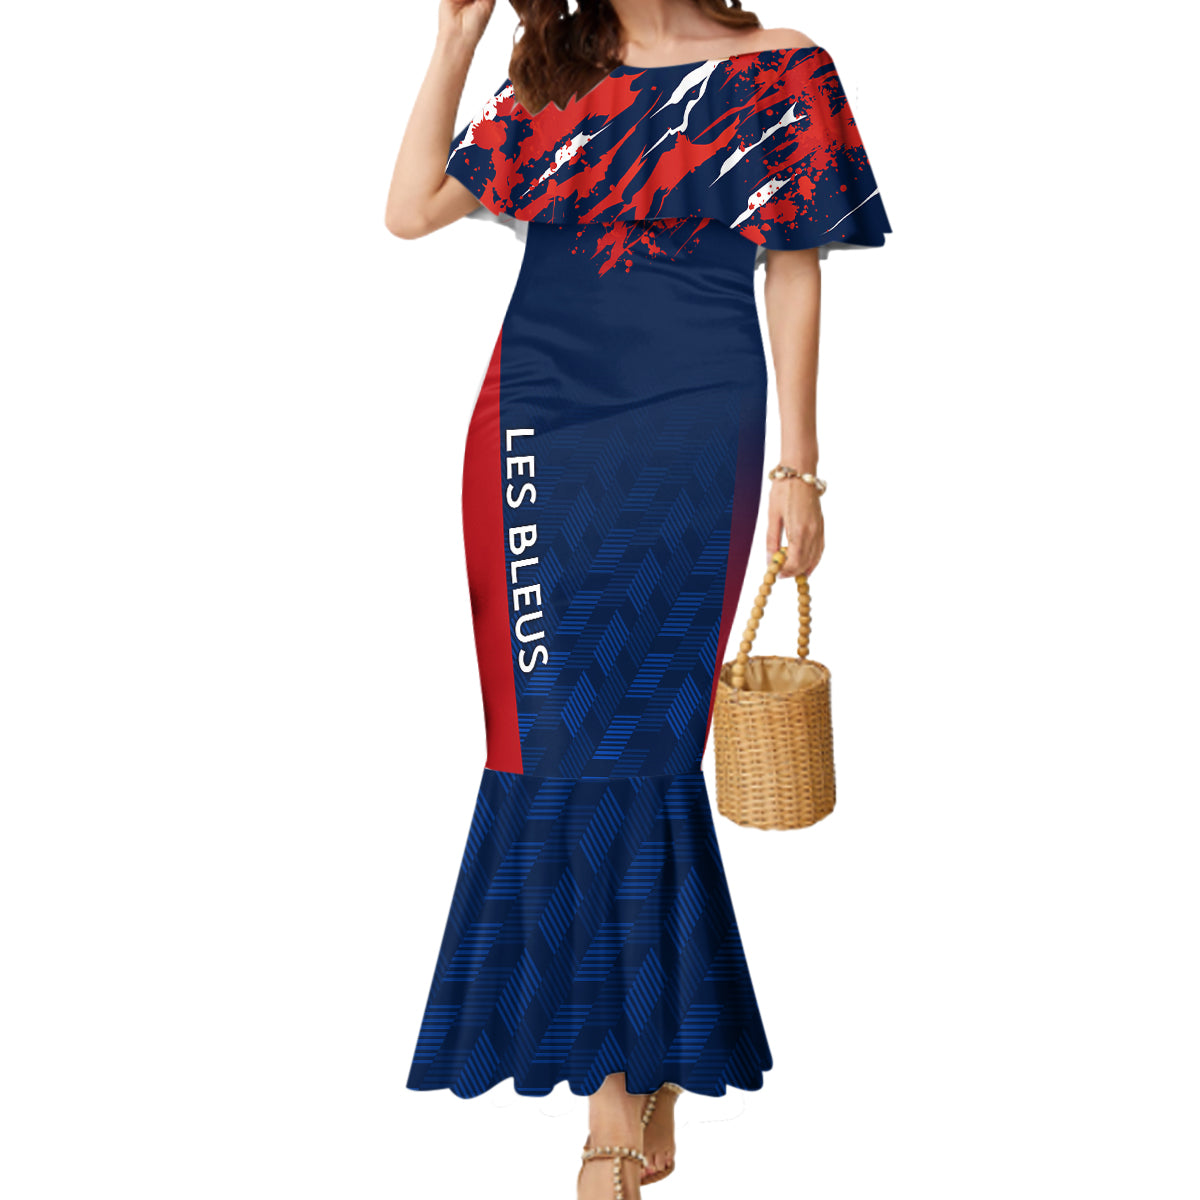 personalised-france-rugby-mermaid-dress-2023-world-cup-allez-les-bleus-grunge-style